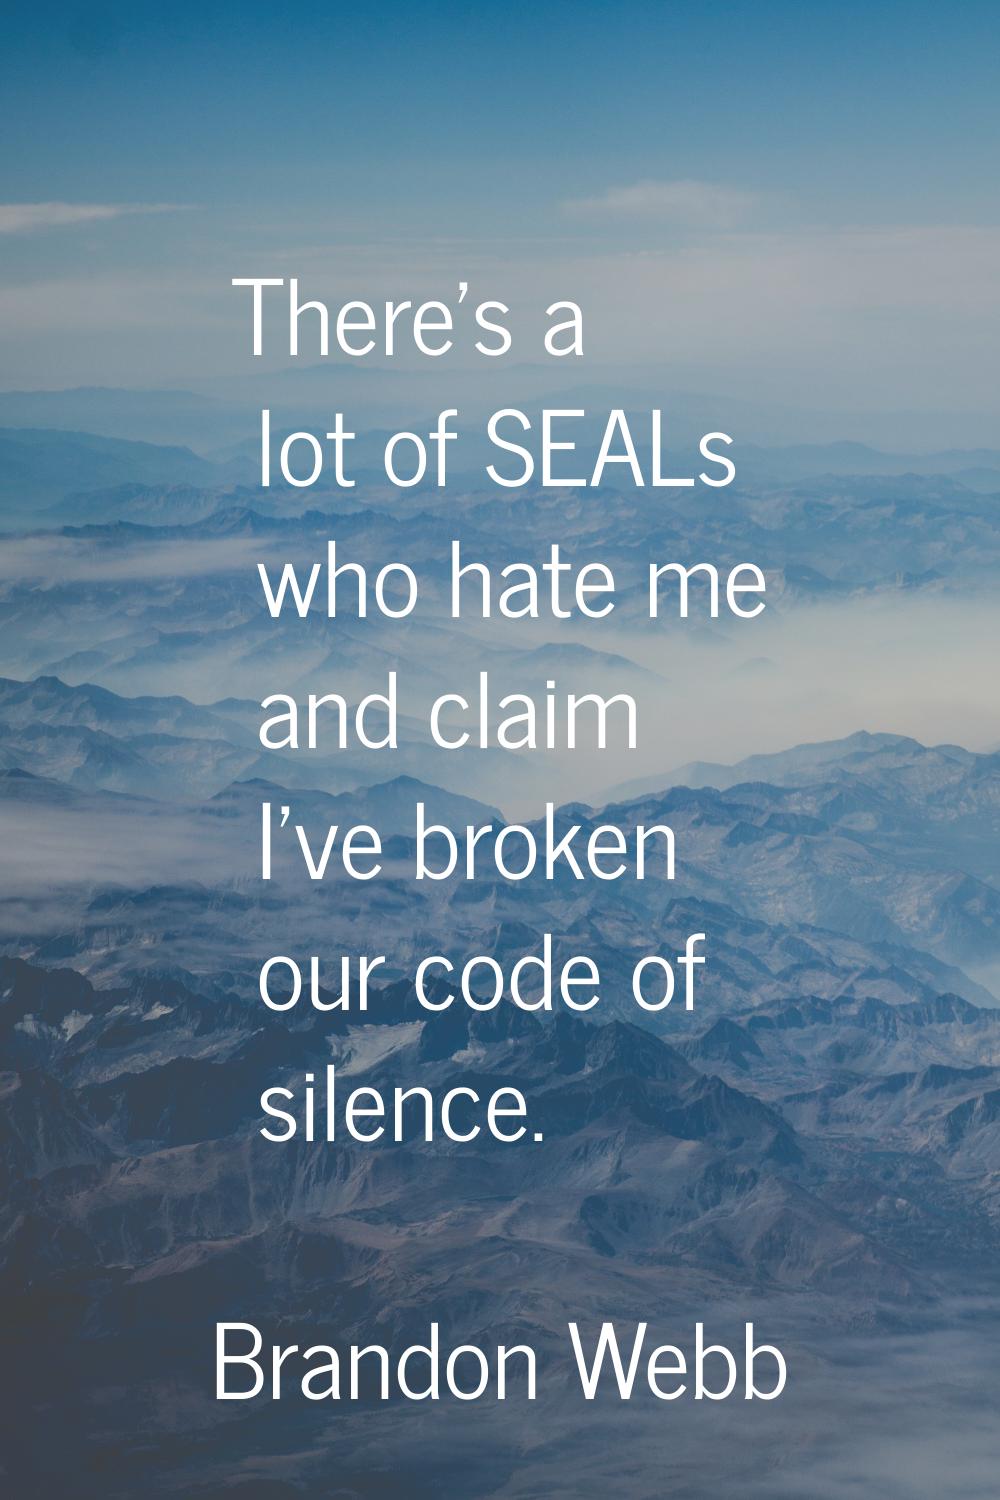 There's a lot of SEALs who hate me and claim I've broken our code of silence.